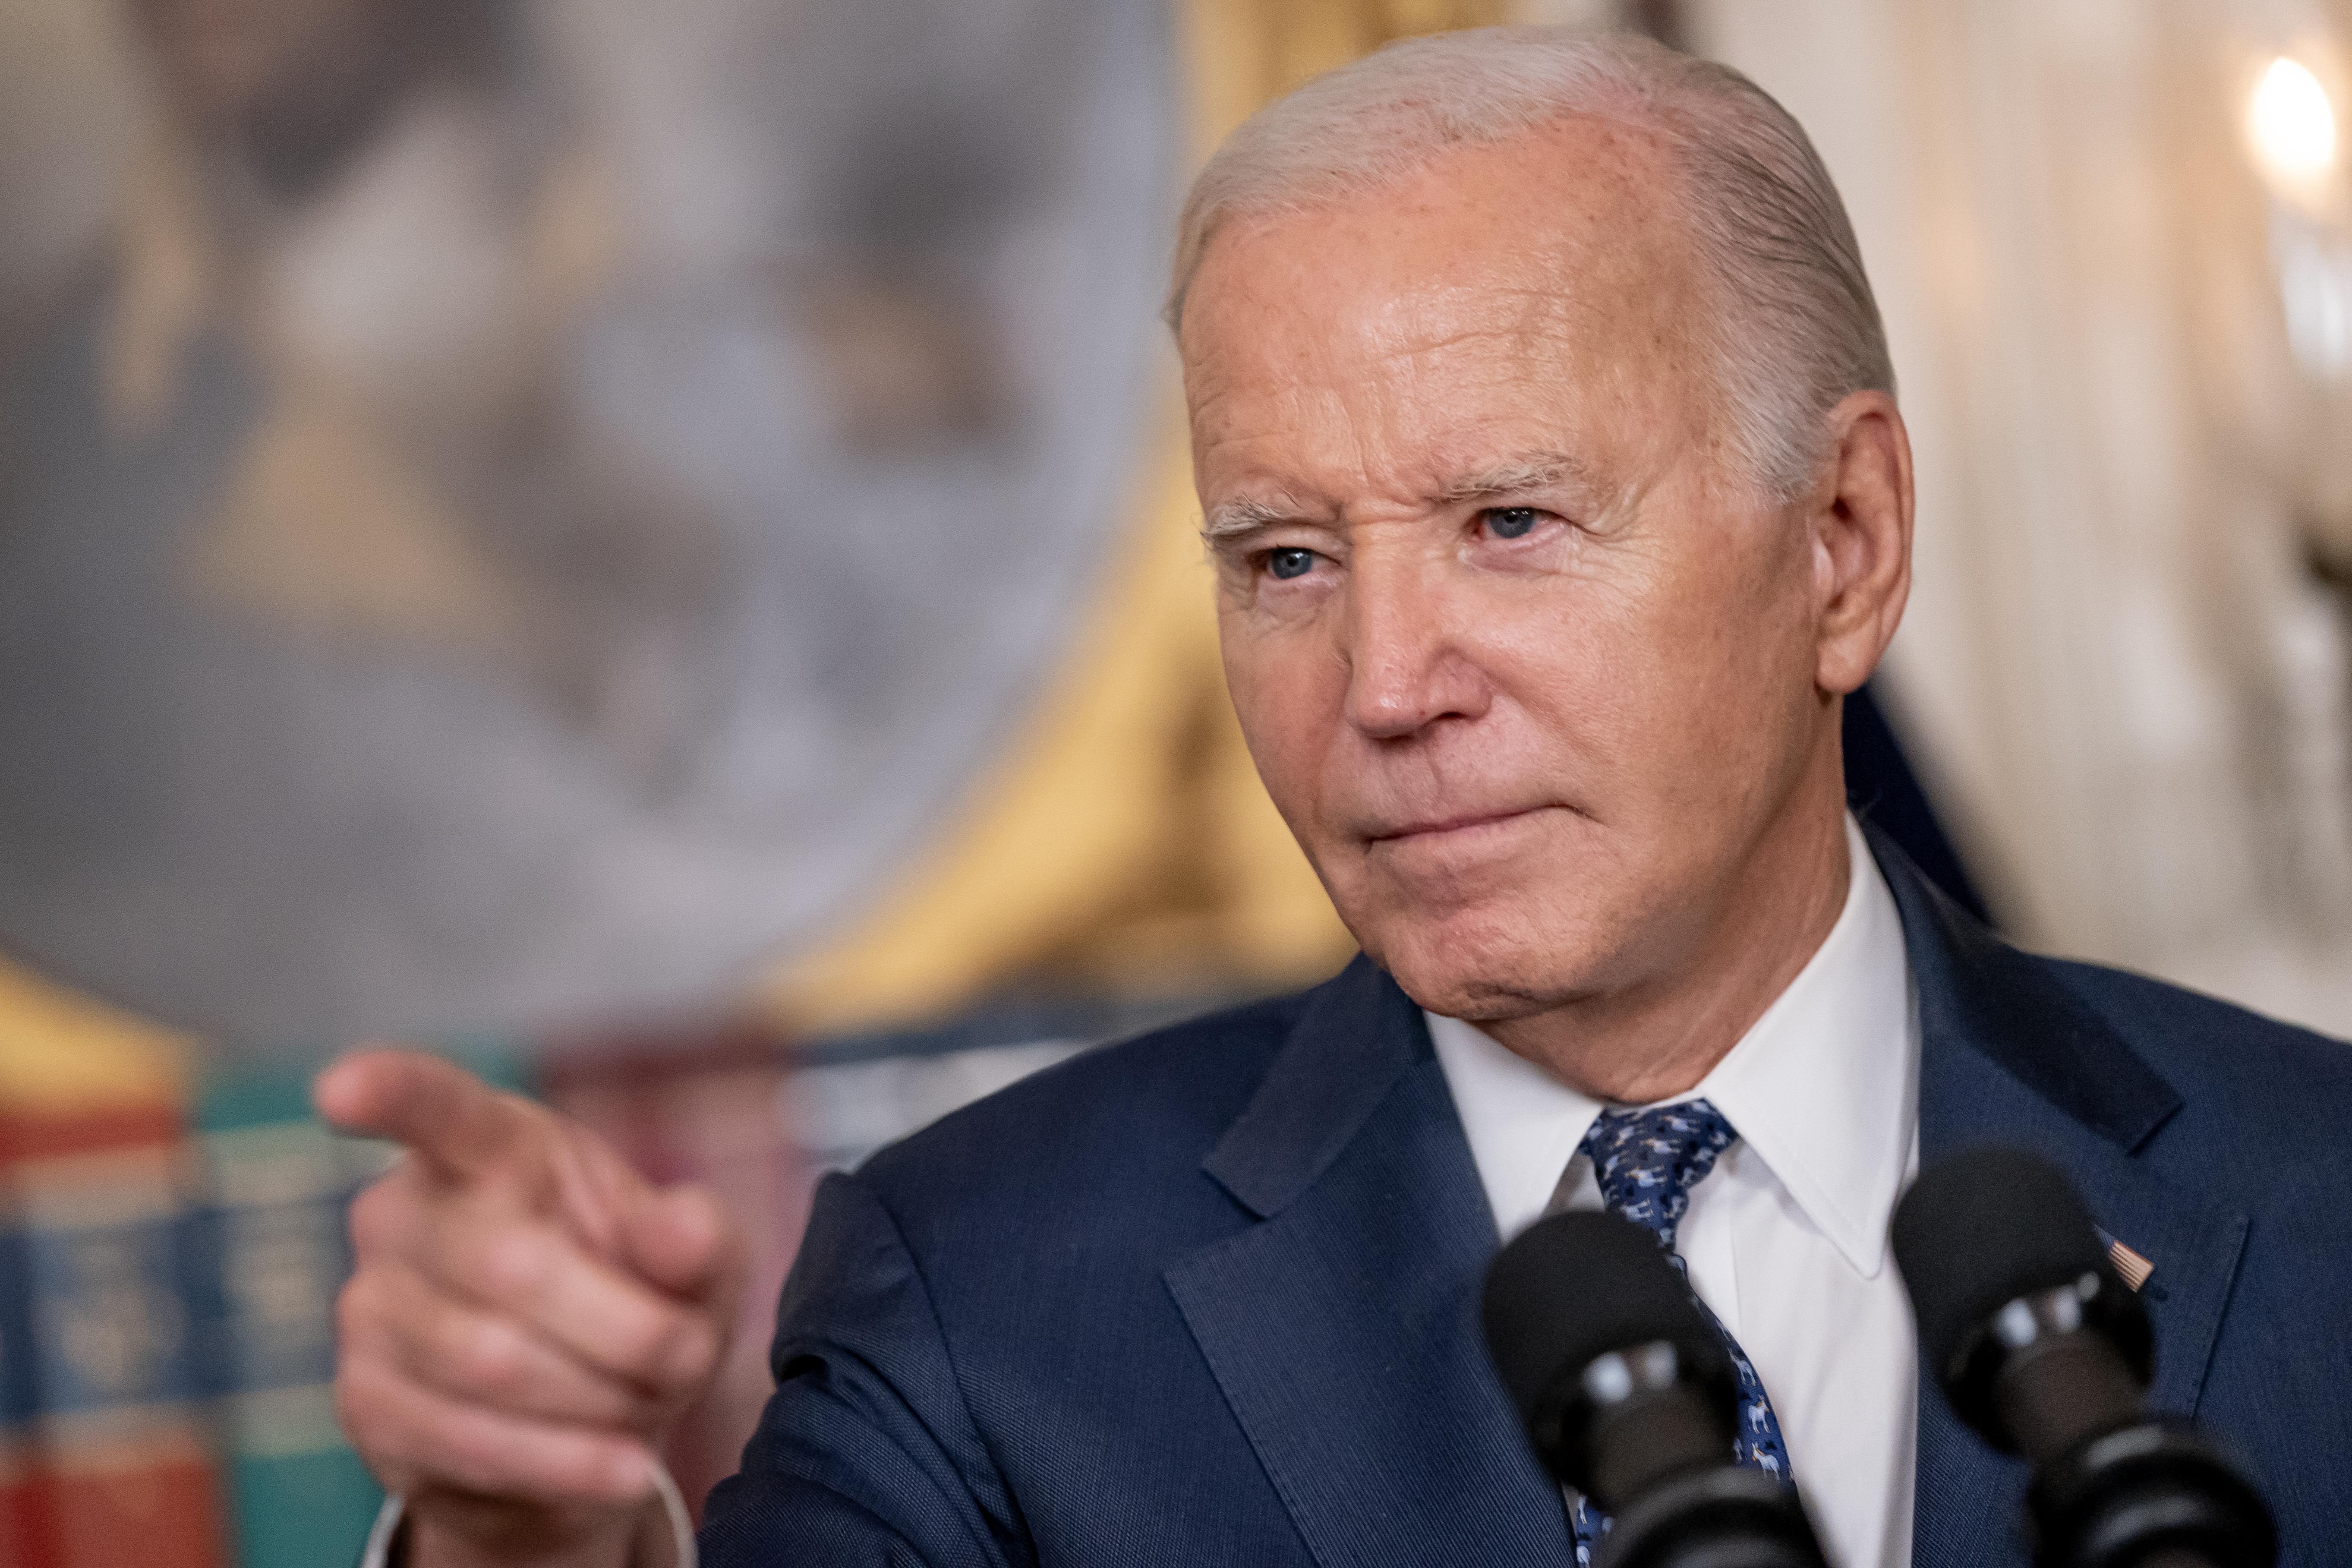 Should Special Counsel Hur Have Weighed in On President Biden’s Memory? David Plotz, Emily Bazelon, and John Dickerson